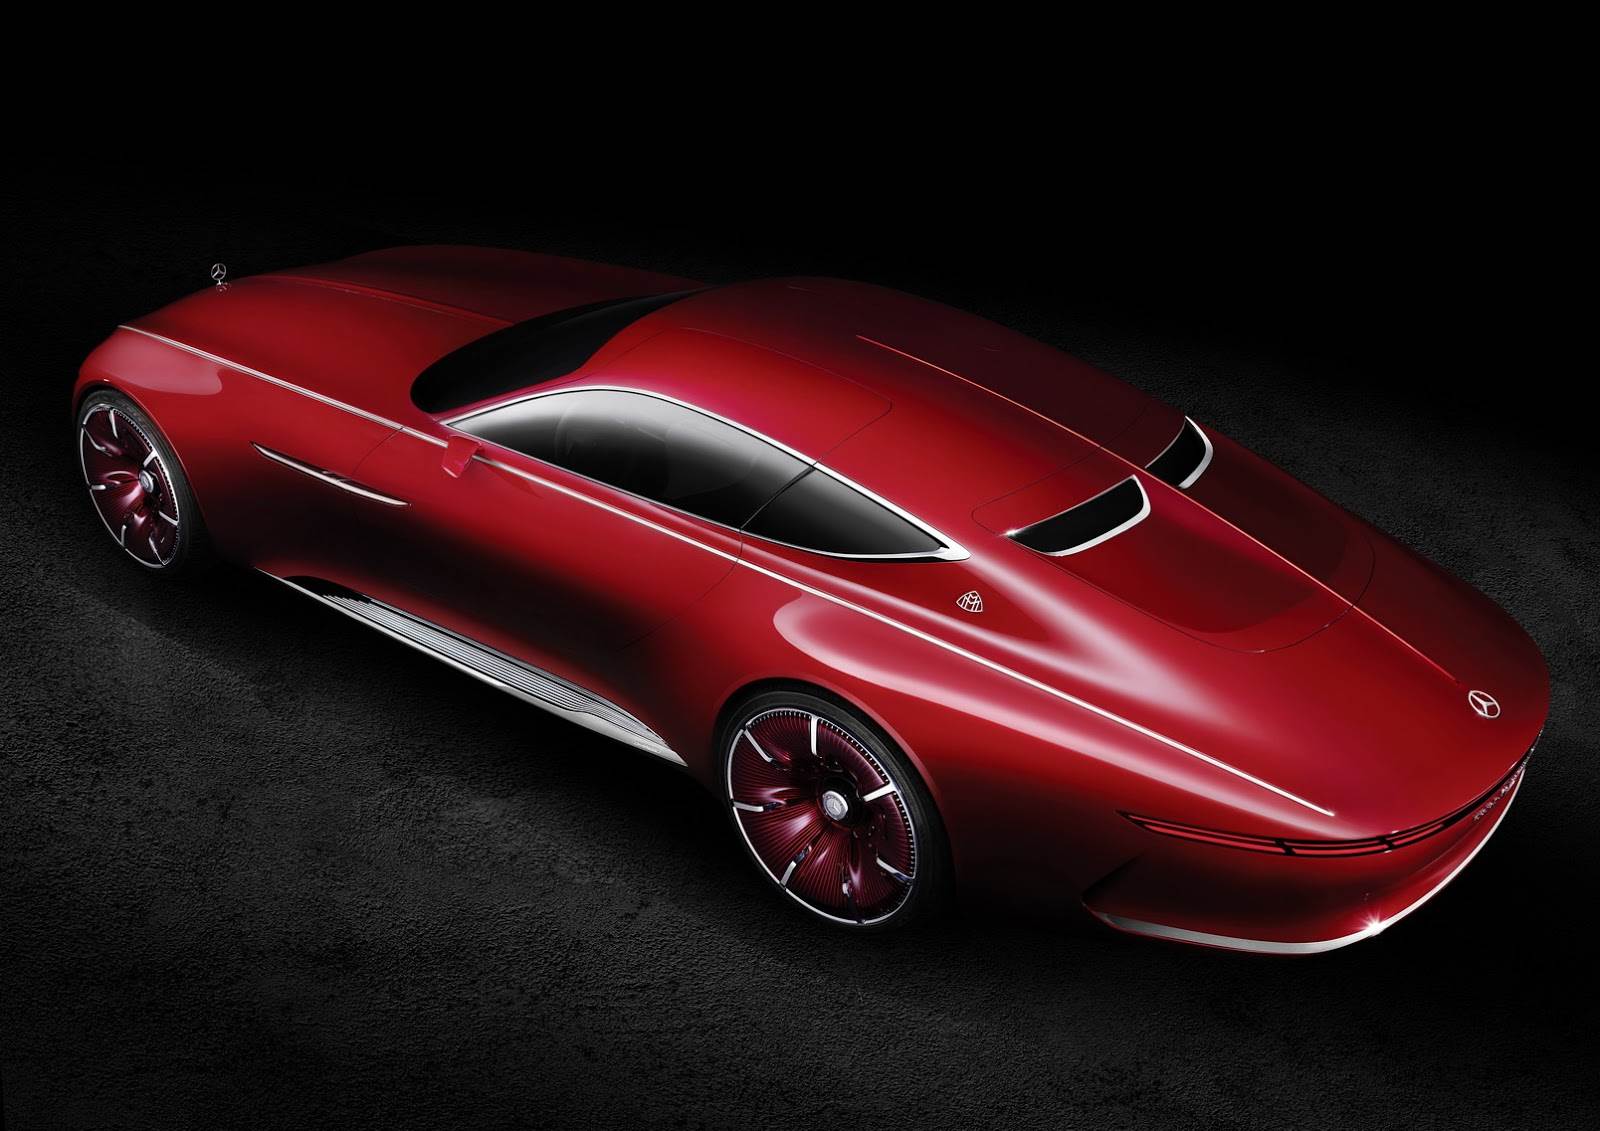 Electric Luxury In Motion: Mercedes-Maybach Reveals Vision 6